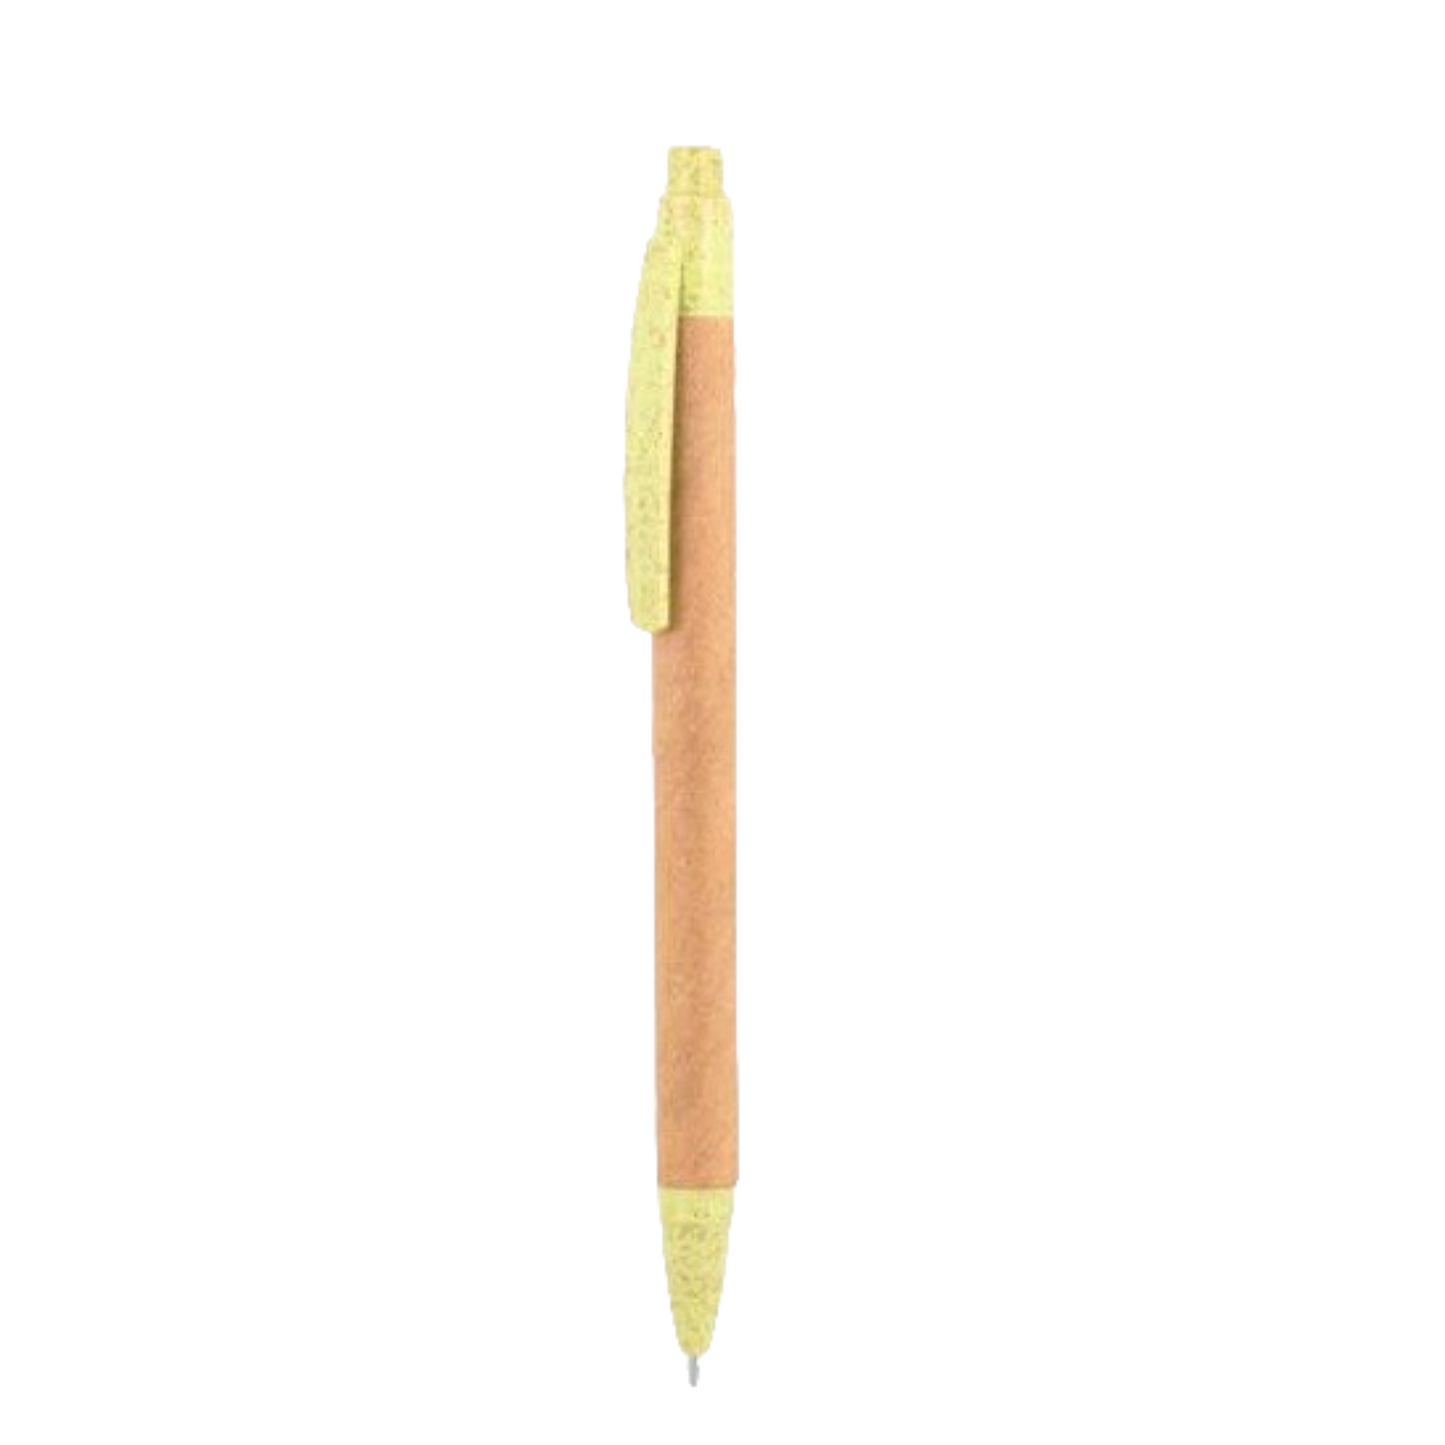 Ecological pen made of wheat fiber and cardboard